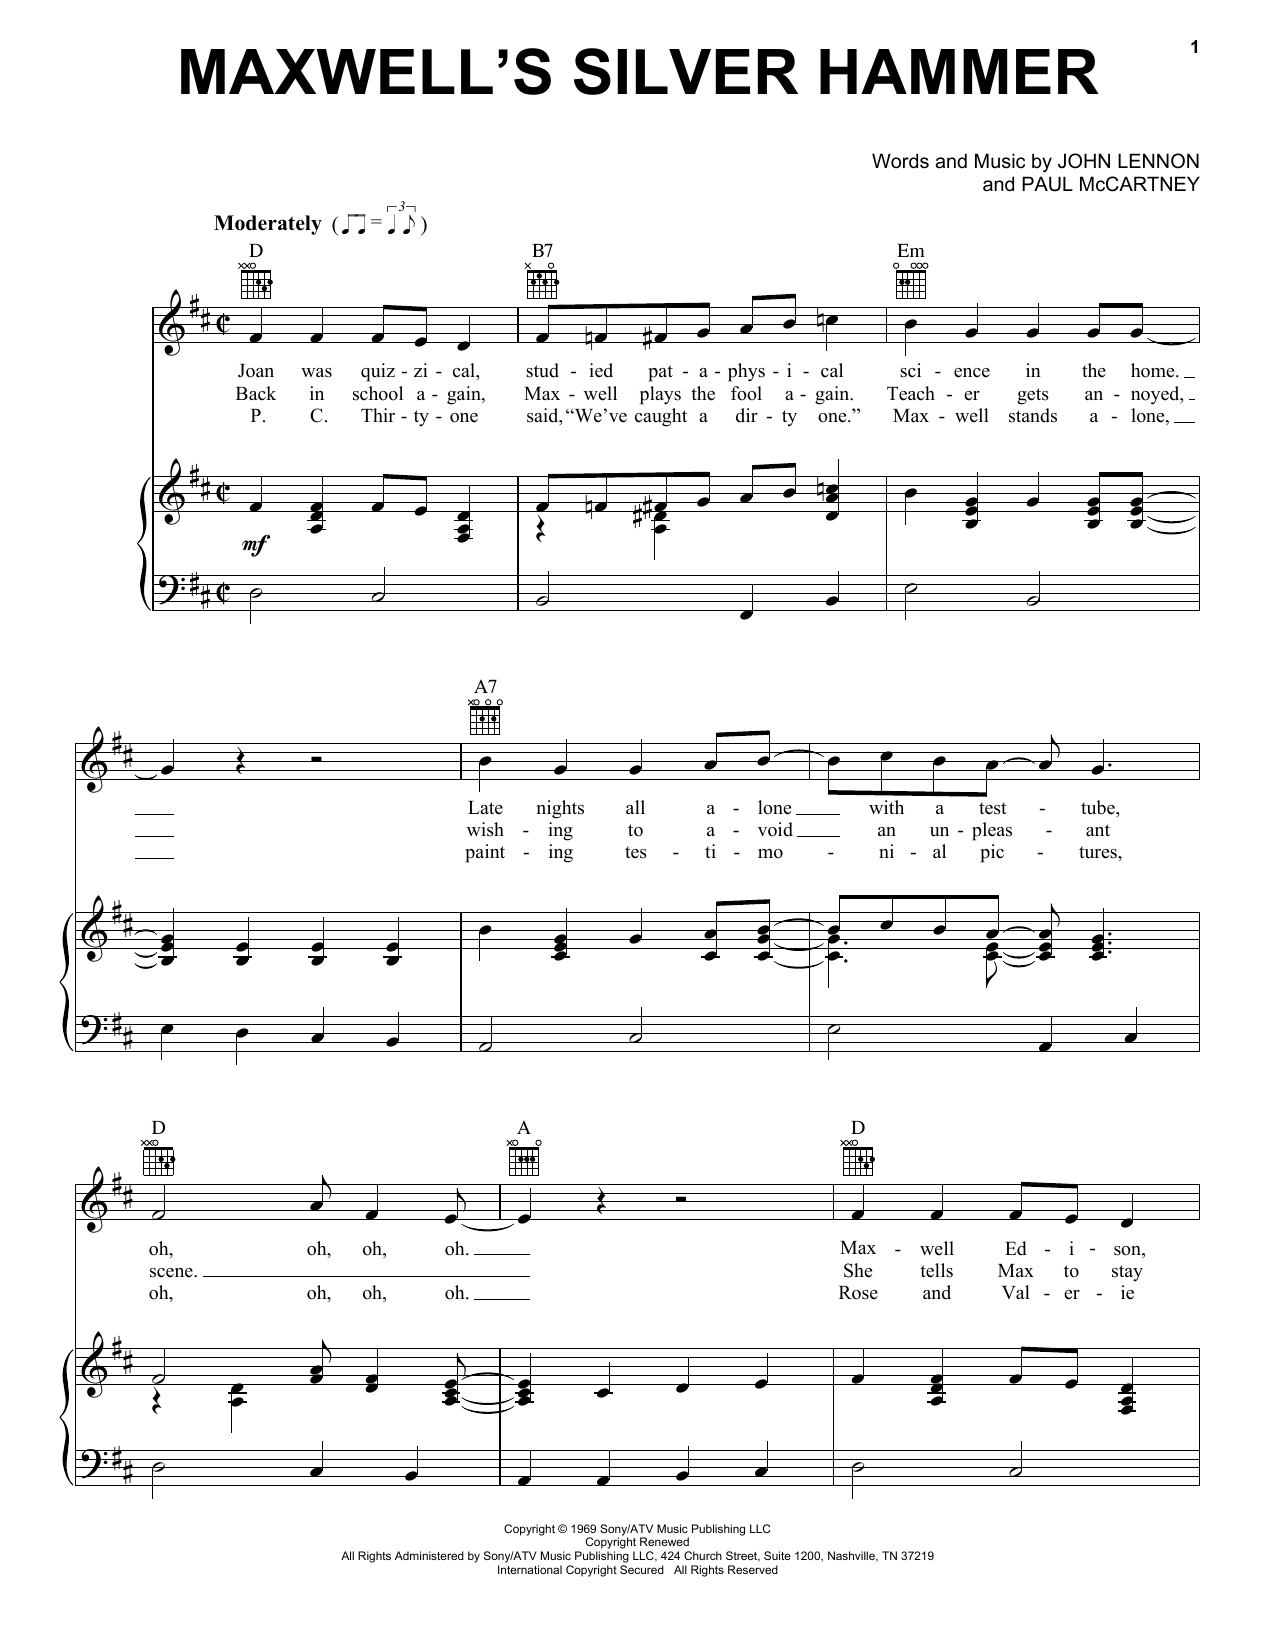 Download The Beatles Maxwell's Silver Hammer Sheet Music